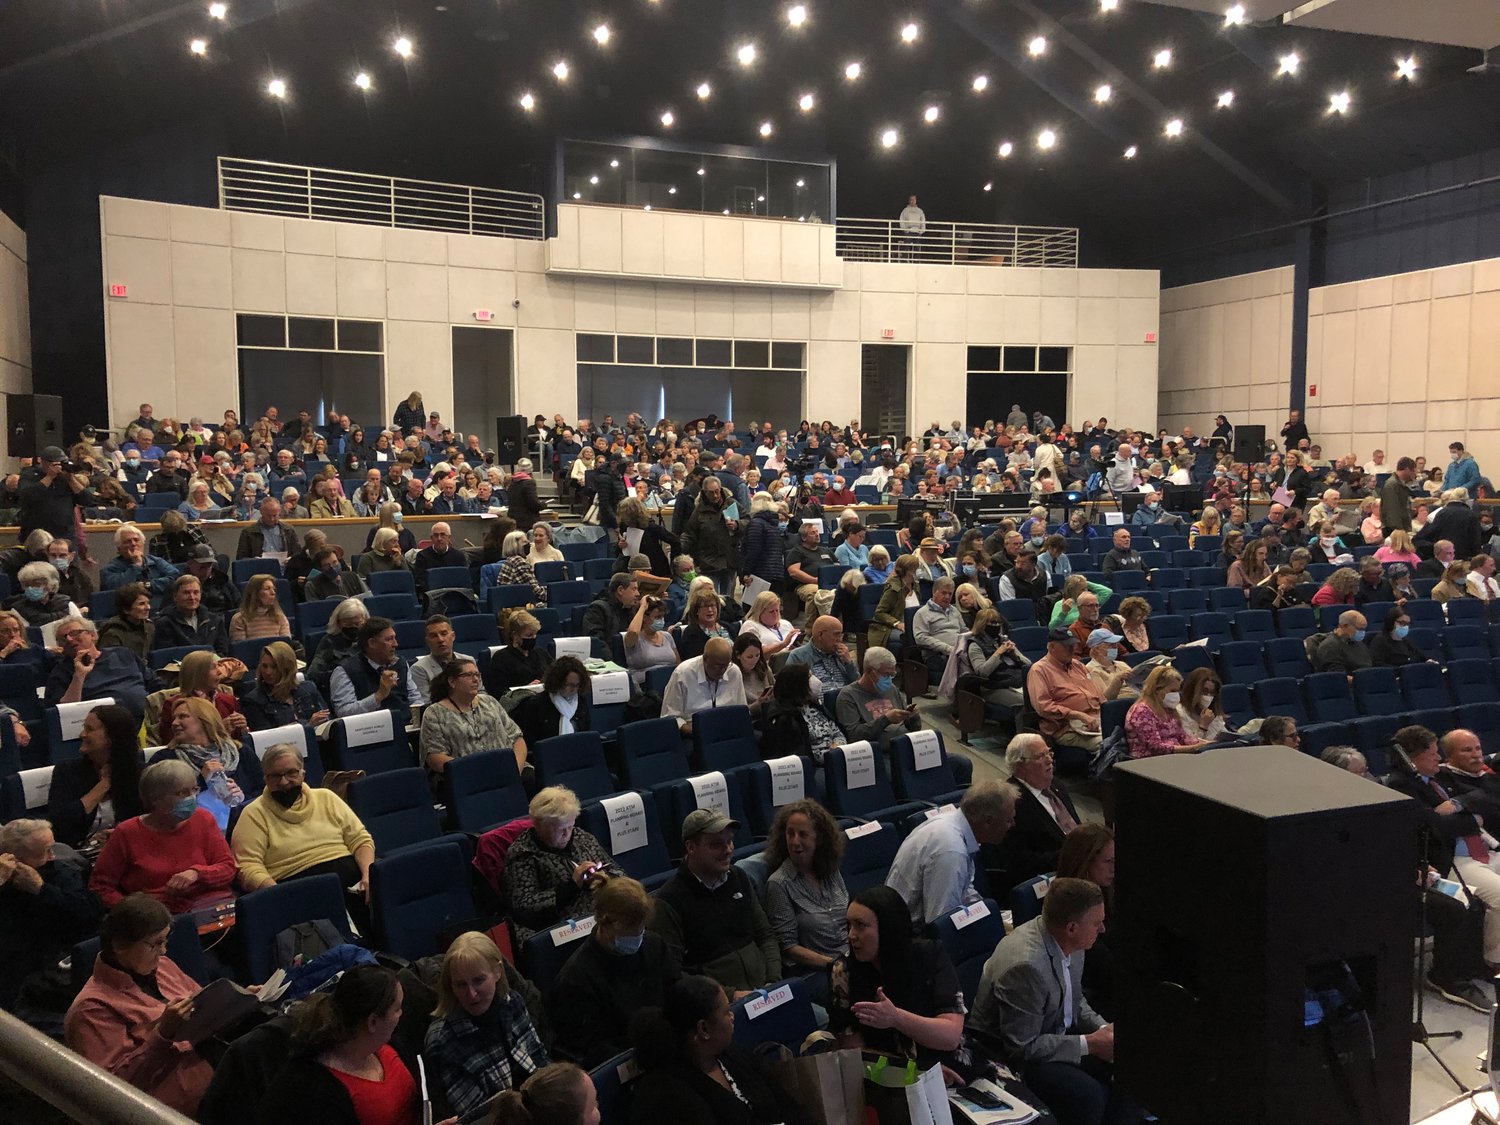 Voters continue to trickle into the Nantucket High School auditorium Monday night as the Annual Town Meeting is gaveled to order with 558 voters present.